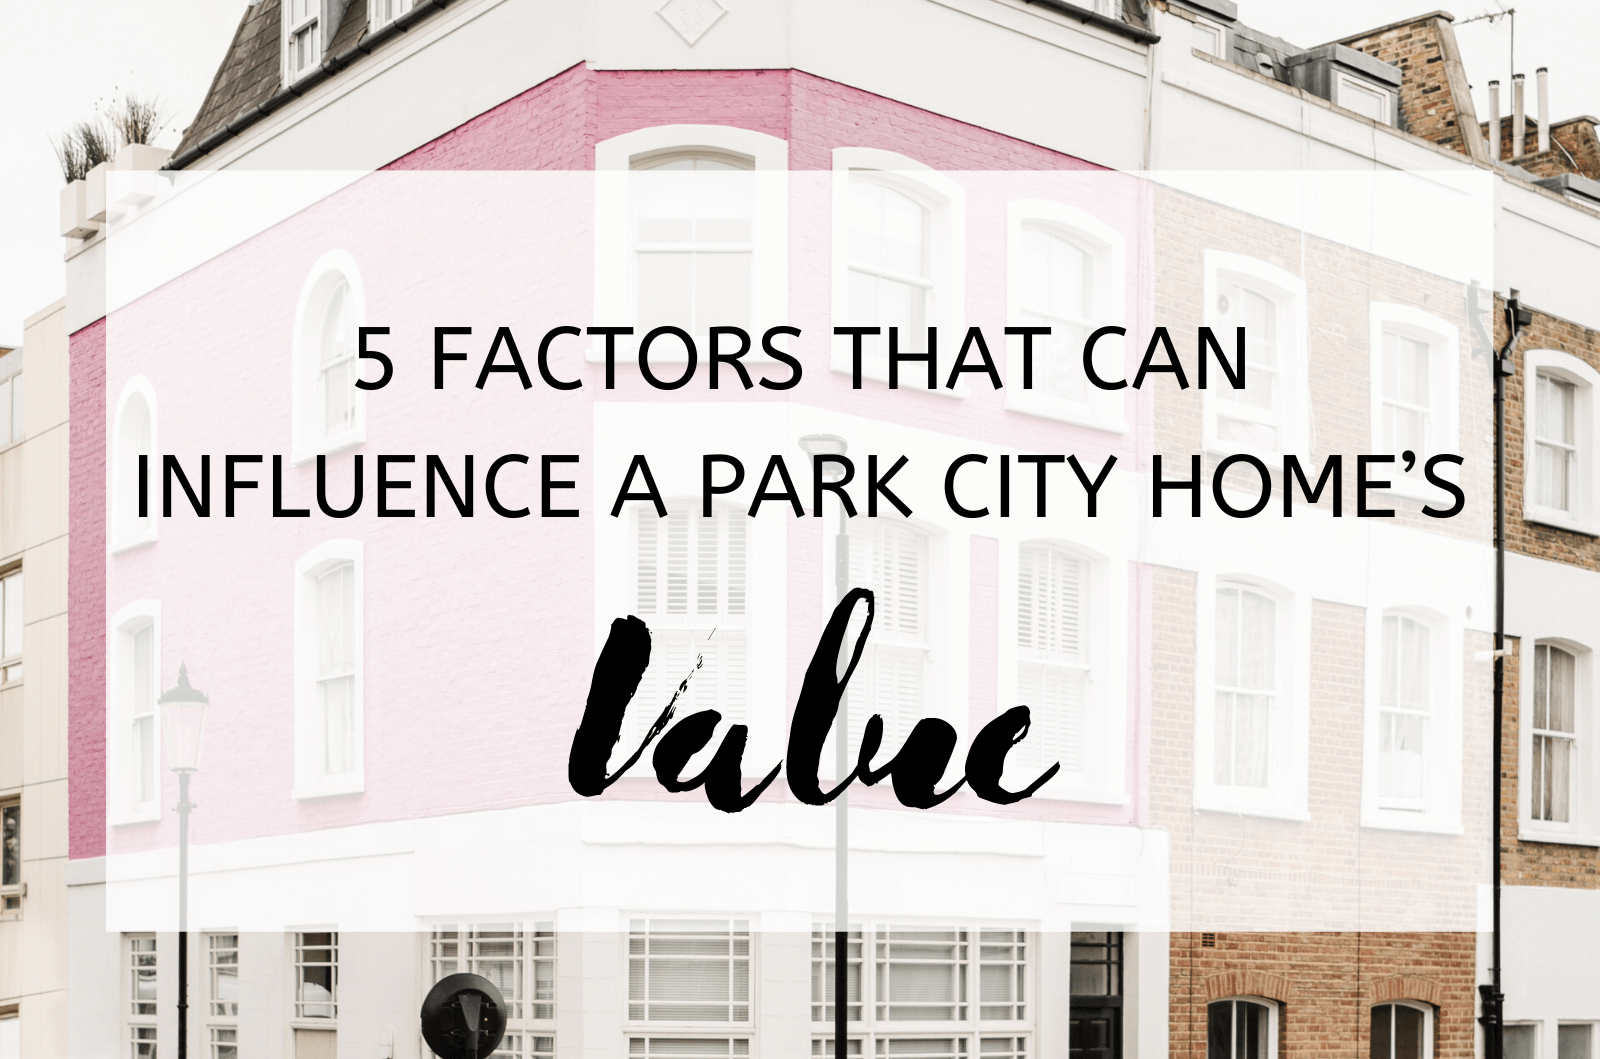 5 Factors That Can Influence A Park City Home’s Value (1)